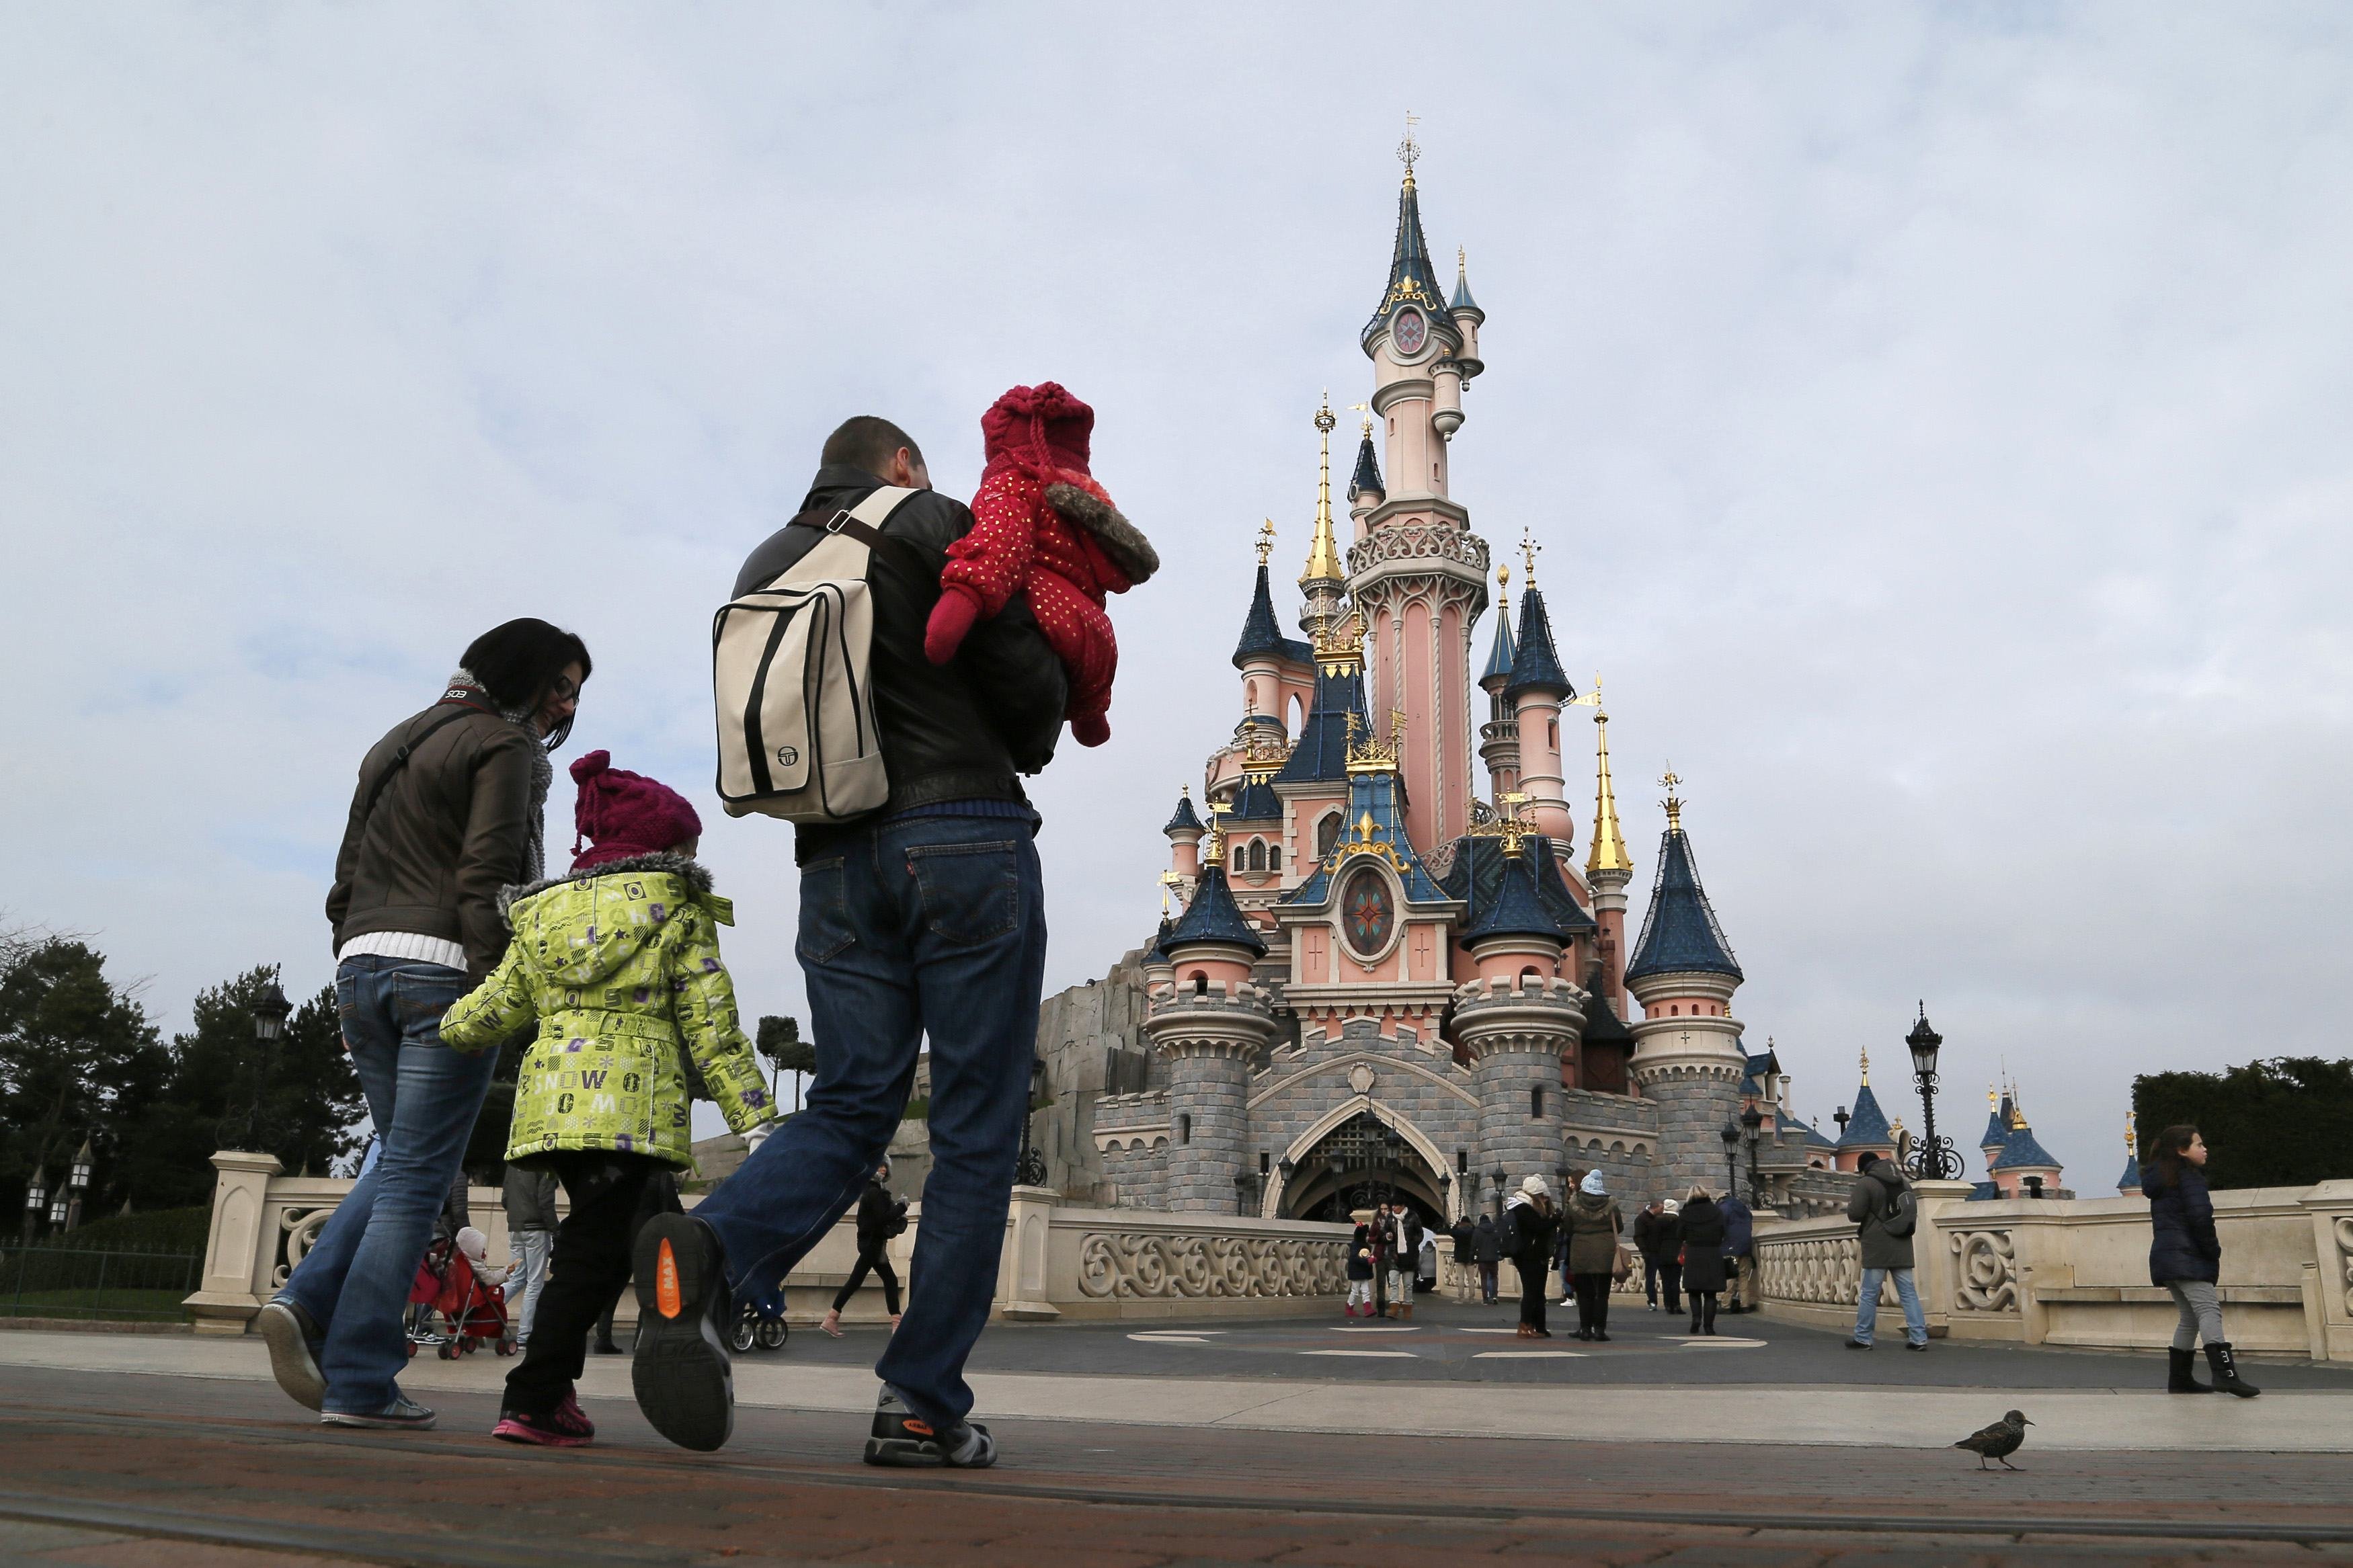 Visitors walk towards the Sleeping Beauty Castle during a visit to the Disneyland Paris Resort run by EuroDisney S.C.A in Marne-la-Vallee on Jan. 21, 2015.